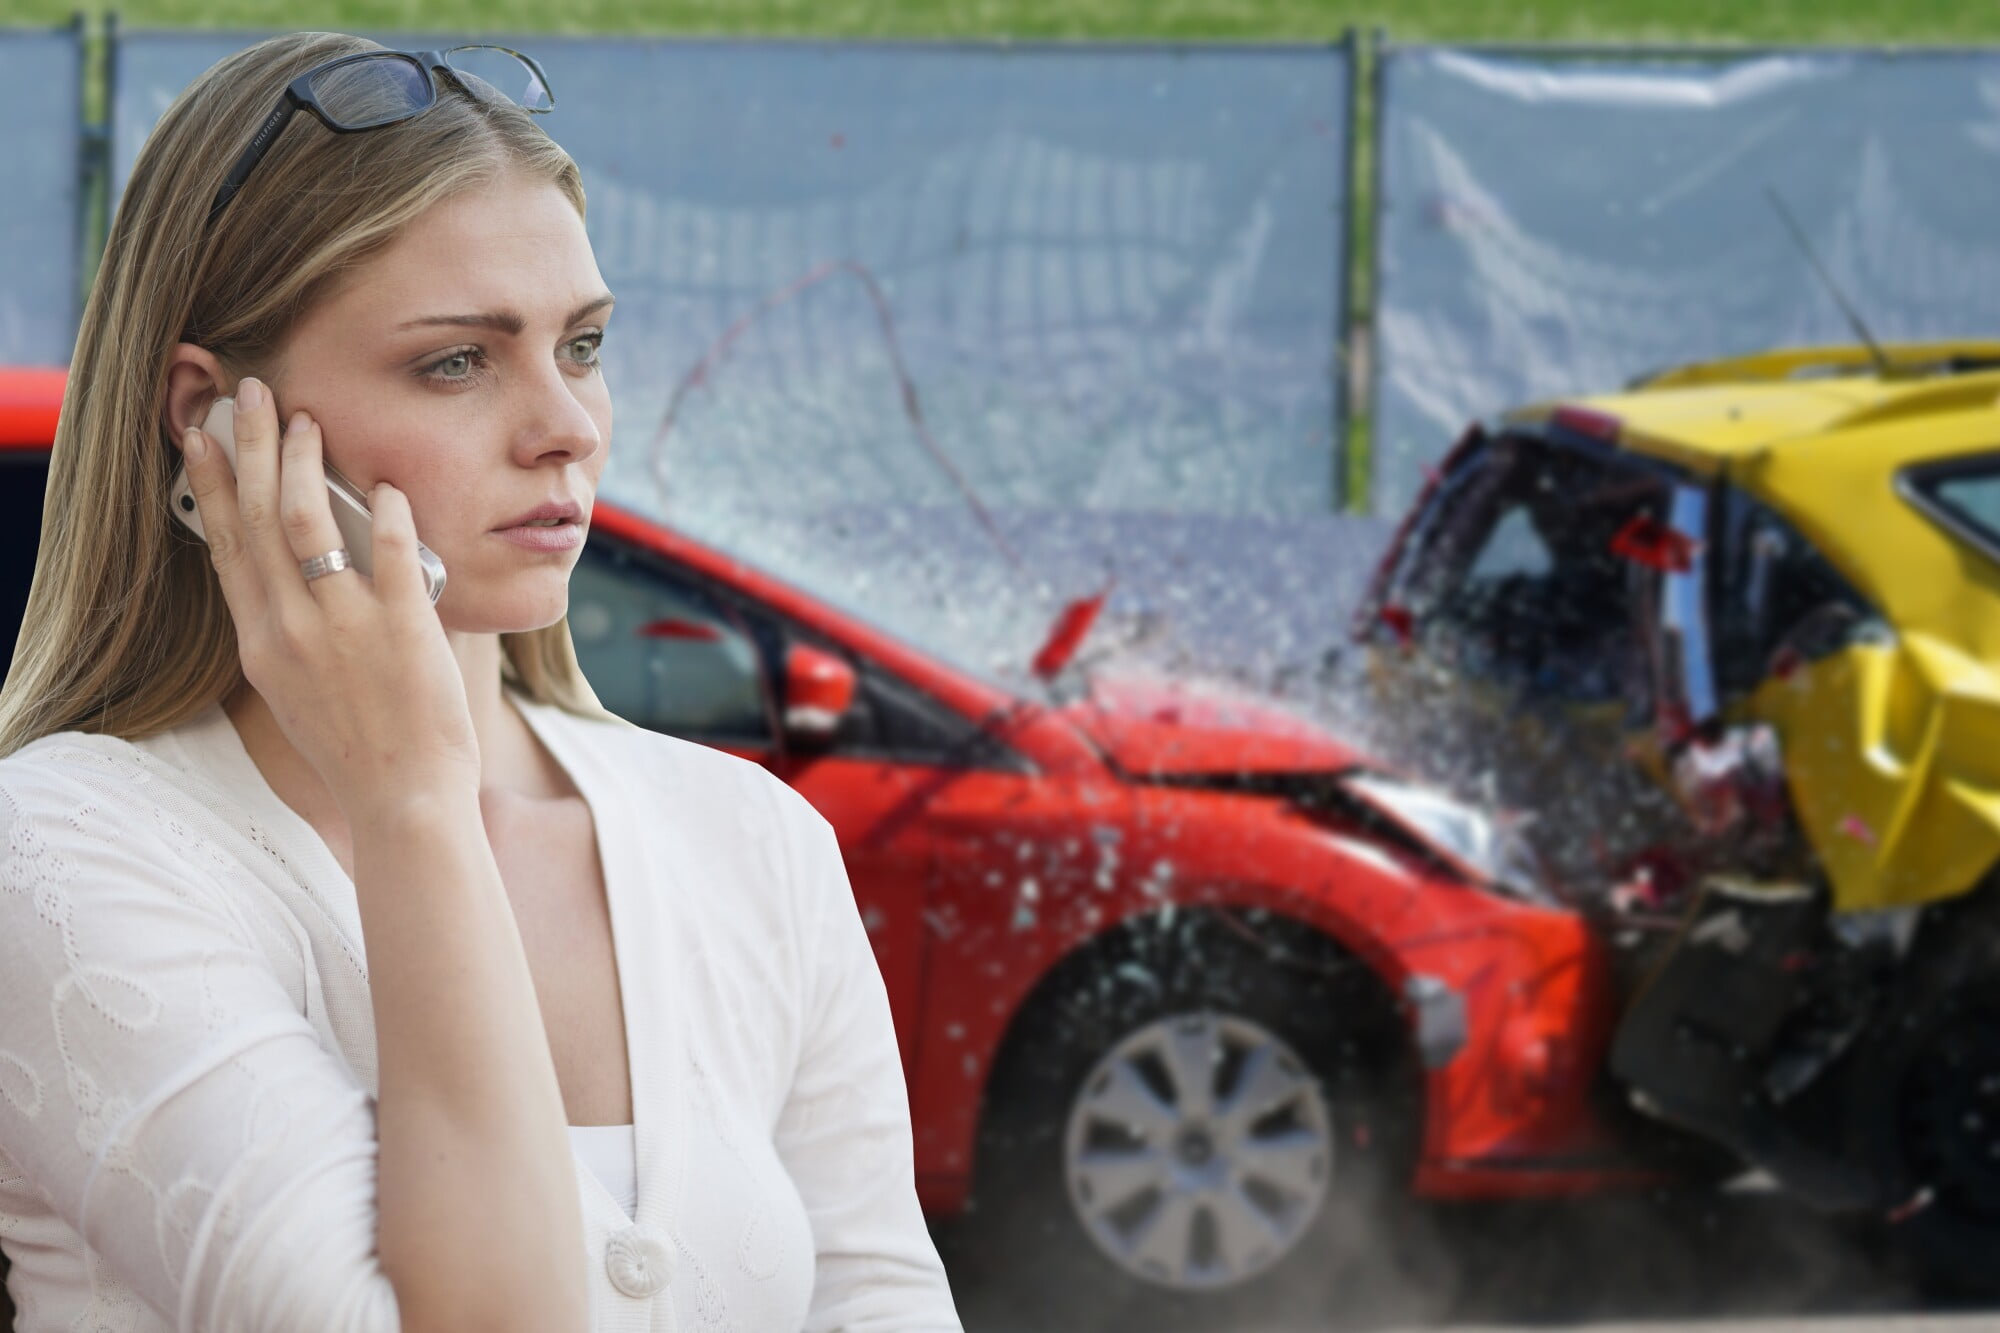 If you have your license, you need to know what to do after a car accident. Our step by step guide right here has you covered.